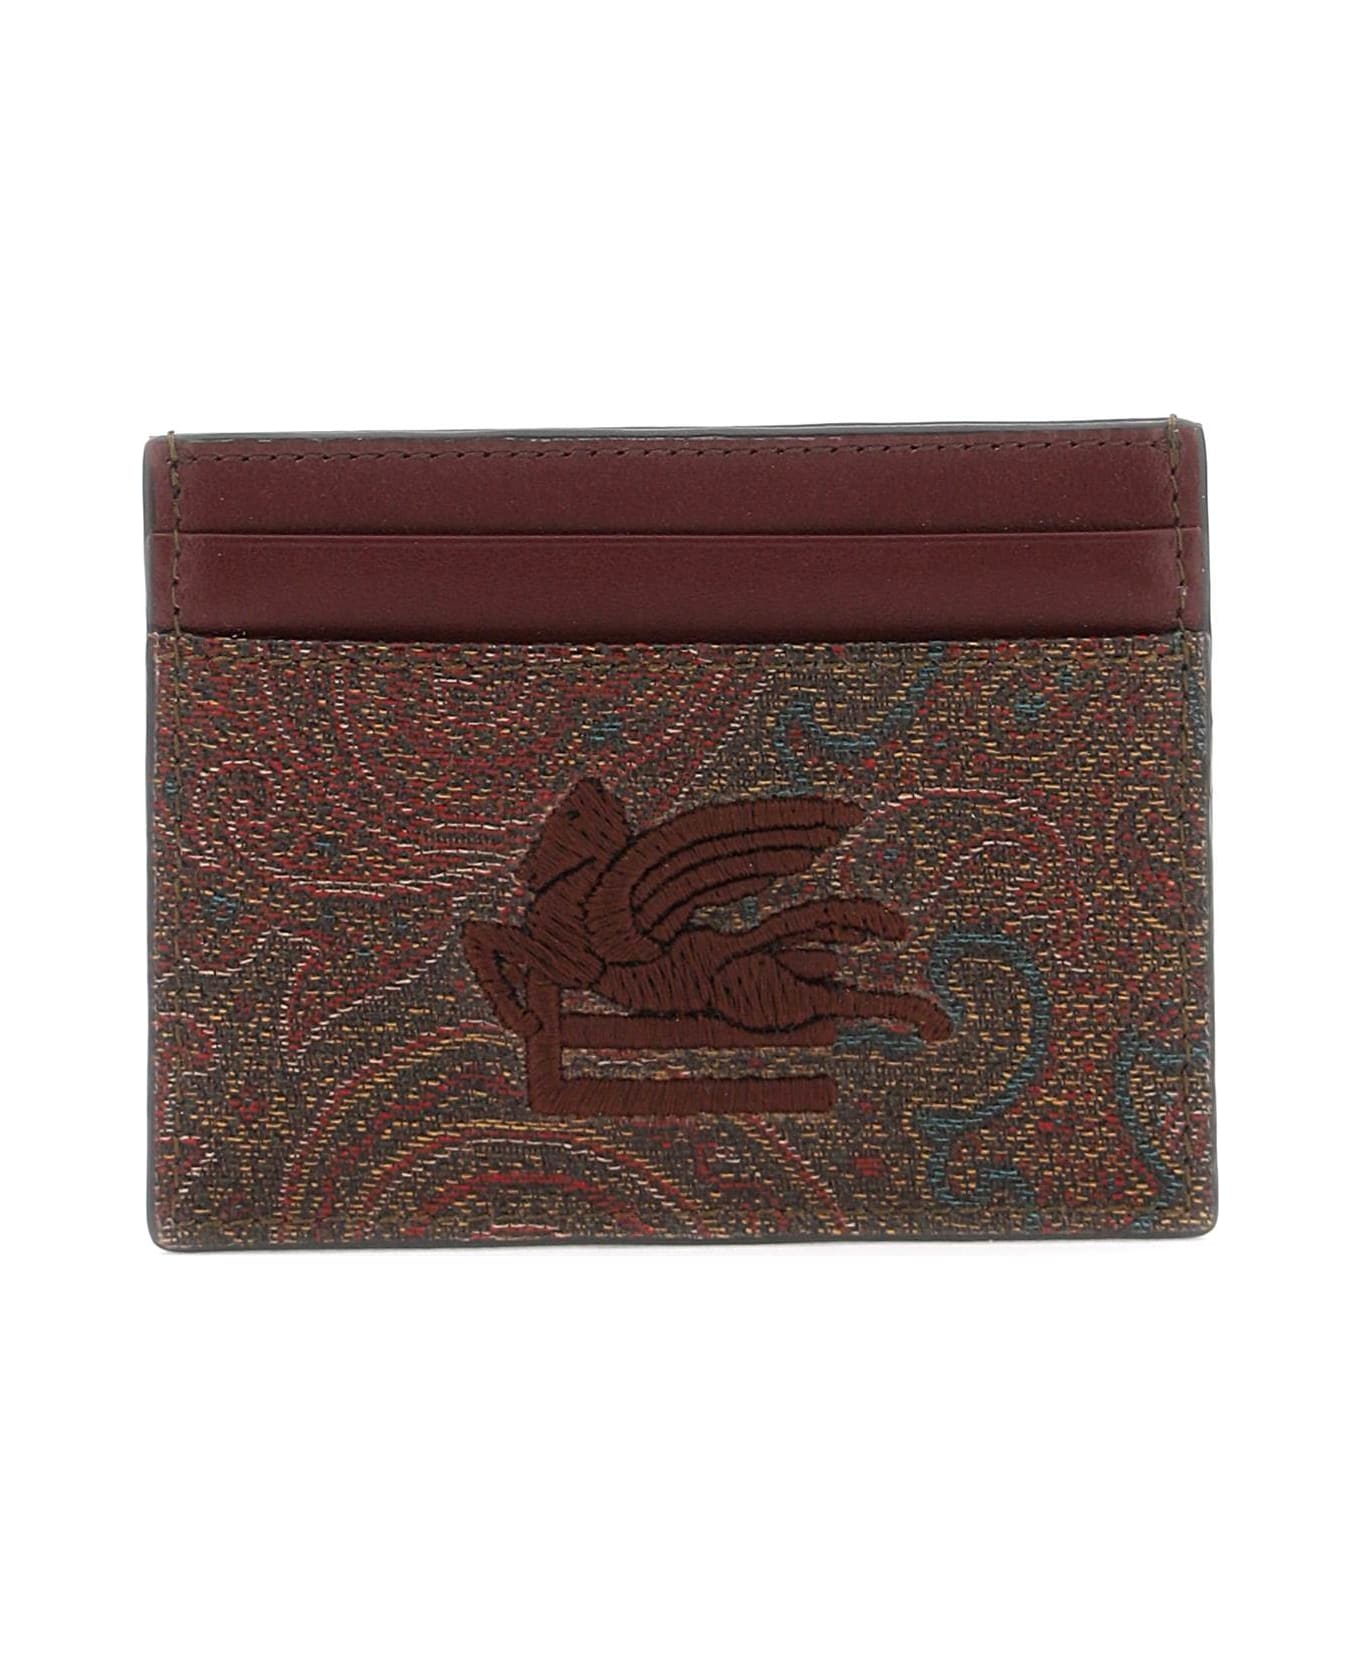 Etro Paisley Cardholder - RED (Brown) 財布